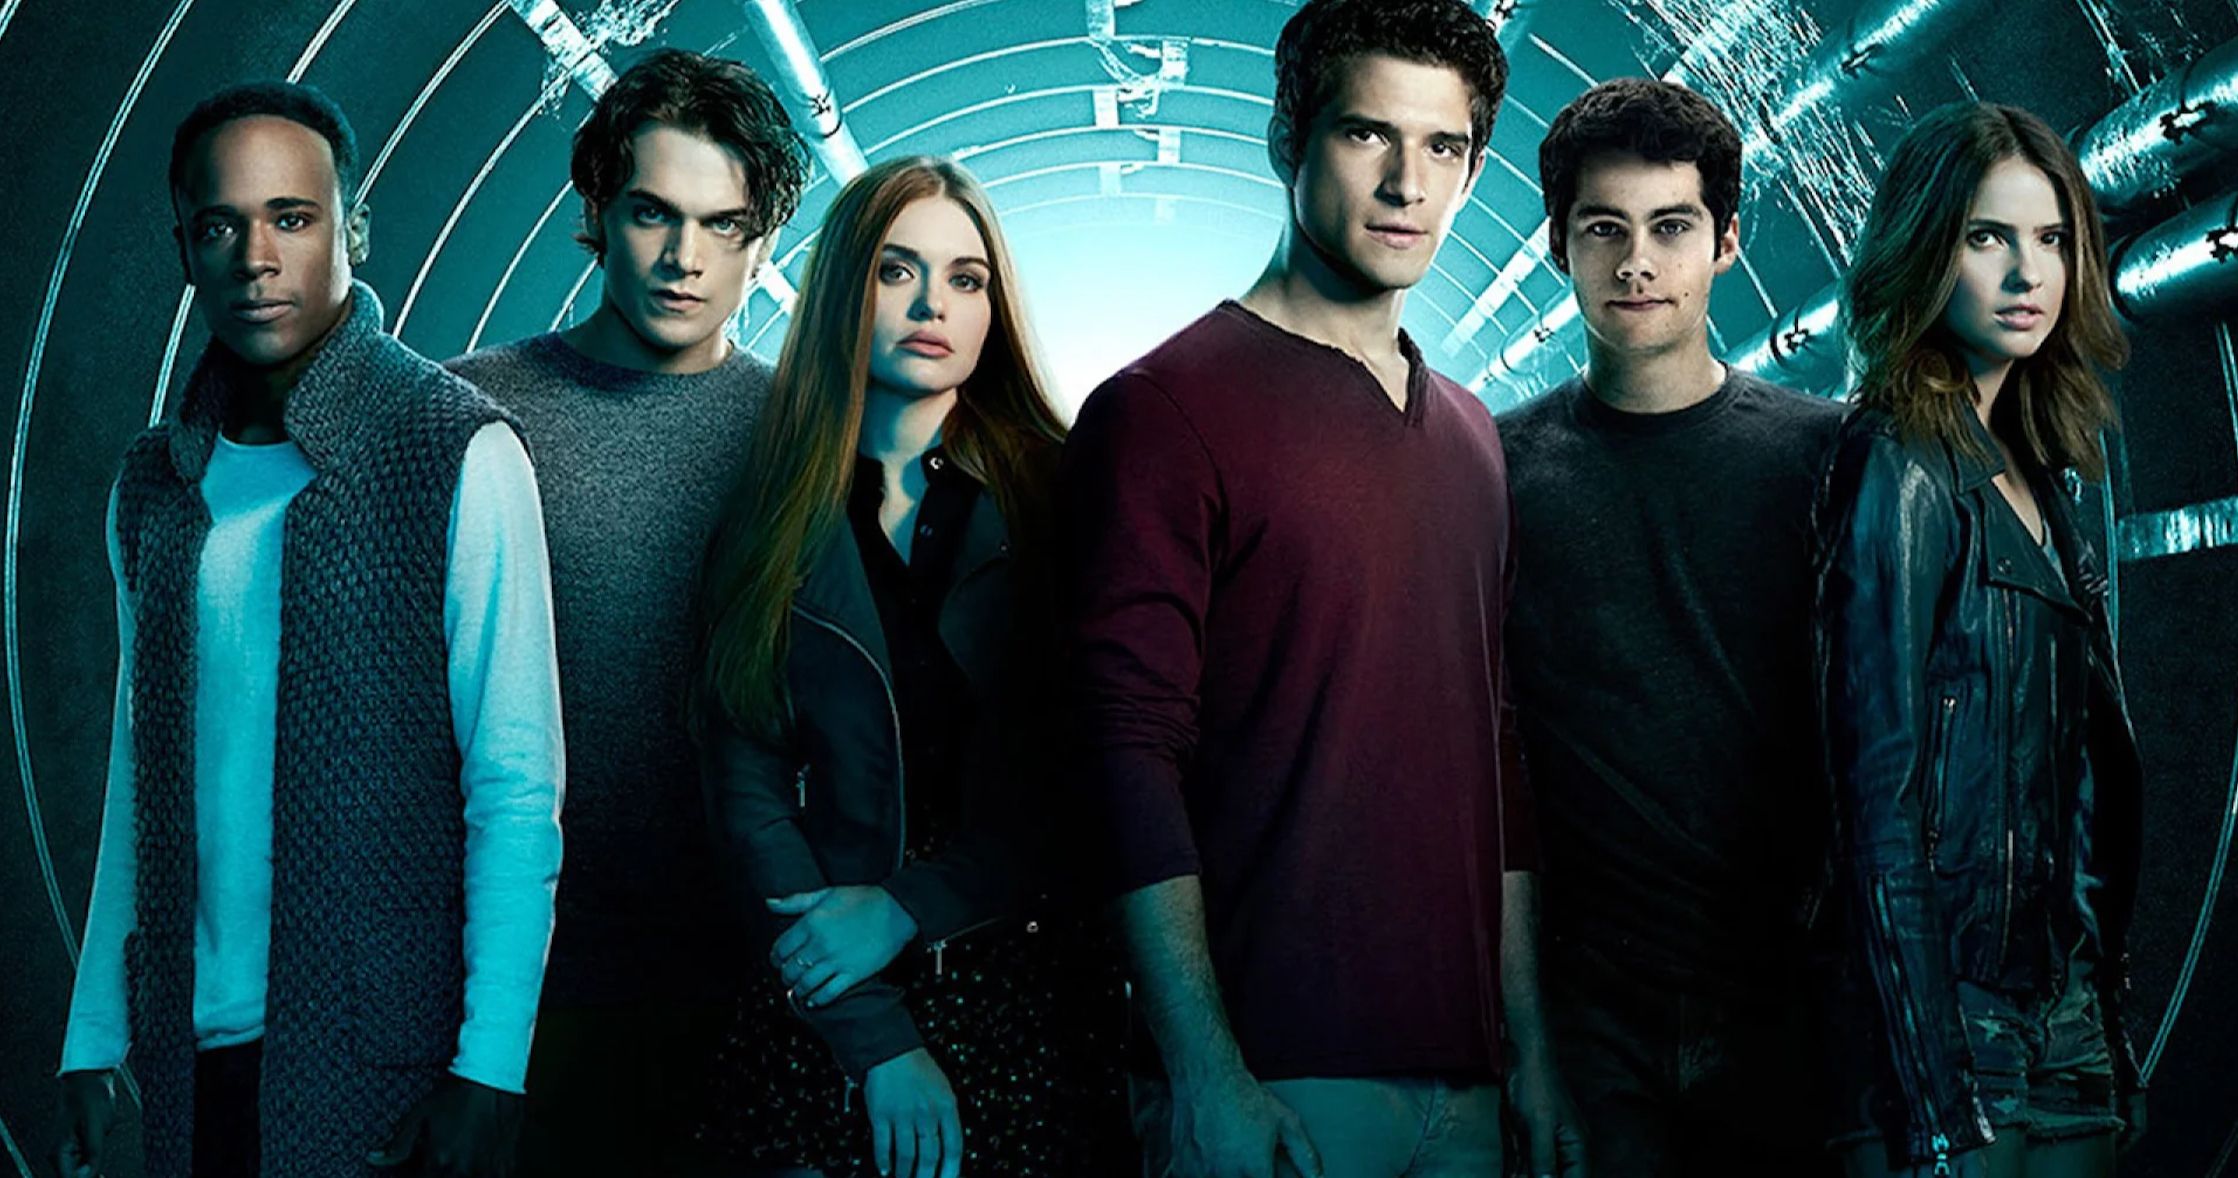 Teen Wolf the Movie Teaser Announces Sequel to MTV Series, Along with